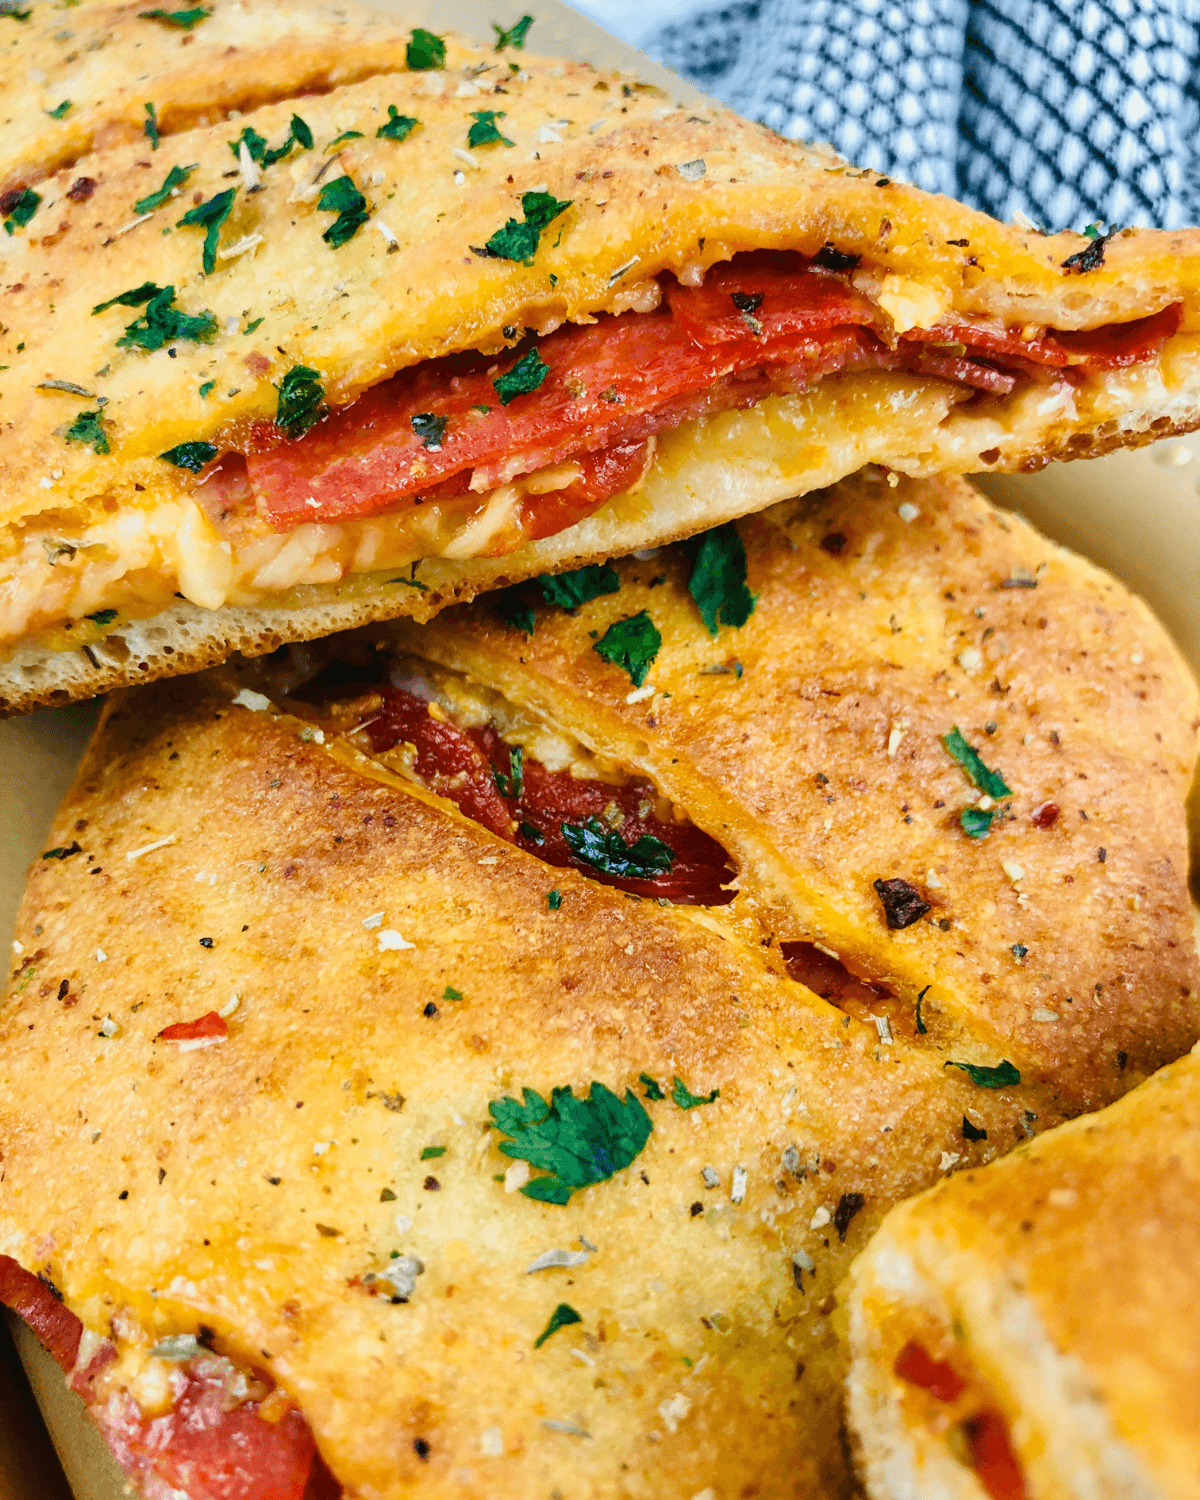 Close-up of a sliced Italian Stromboli filled with melted cheese and tomato, garnished with herbs, on a paper container.